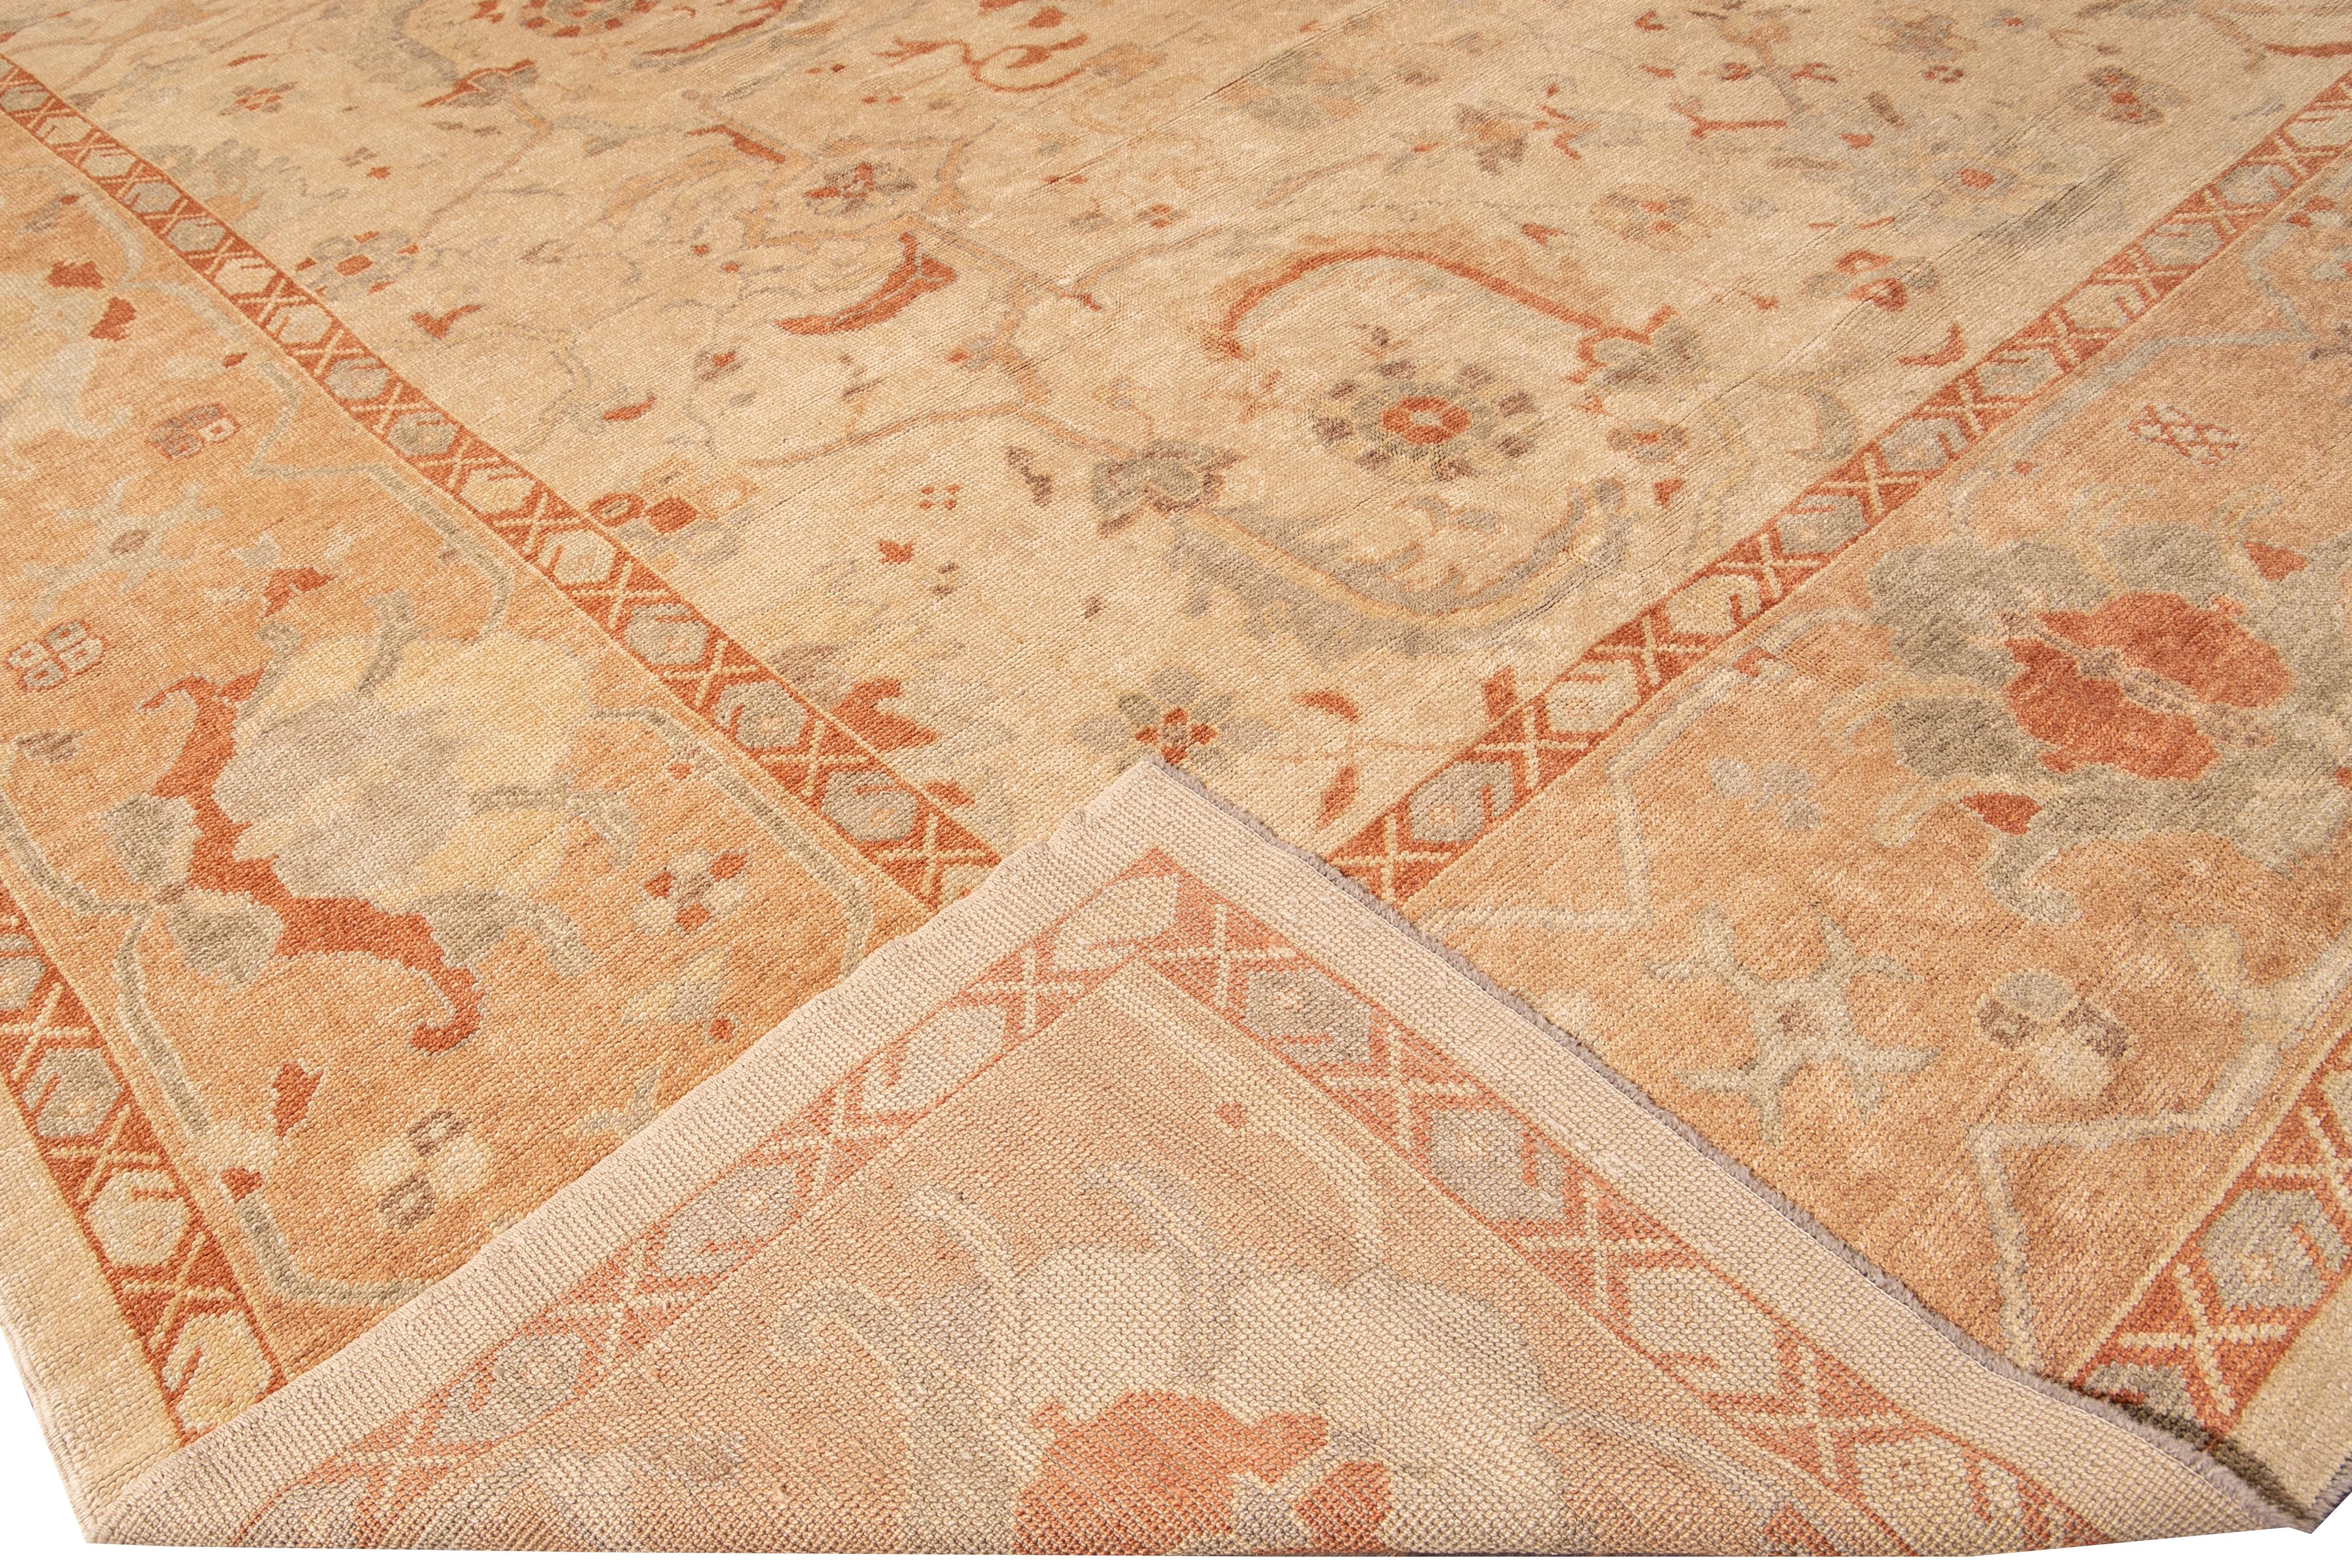 Beautiful antique Turkish Oushak hand-knotted wool rug with the beige field. This Oushak rug has a peach frame gray, orange, and ivory accents in a gorgeous all-over center medallion floral design.

This rug measures: 14'5